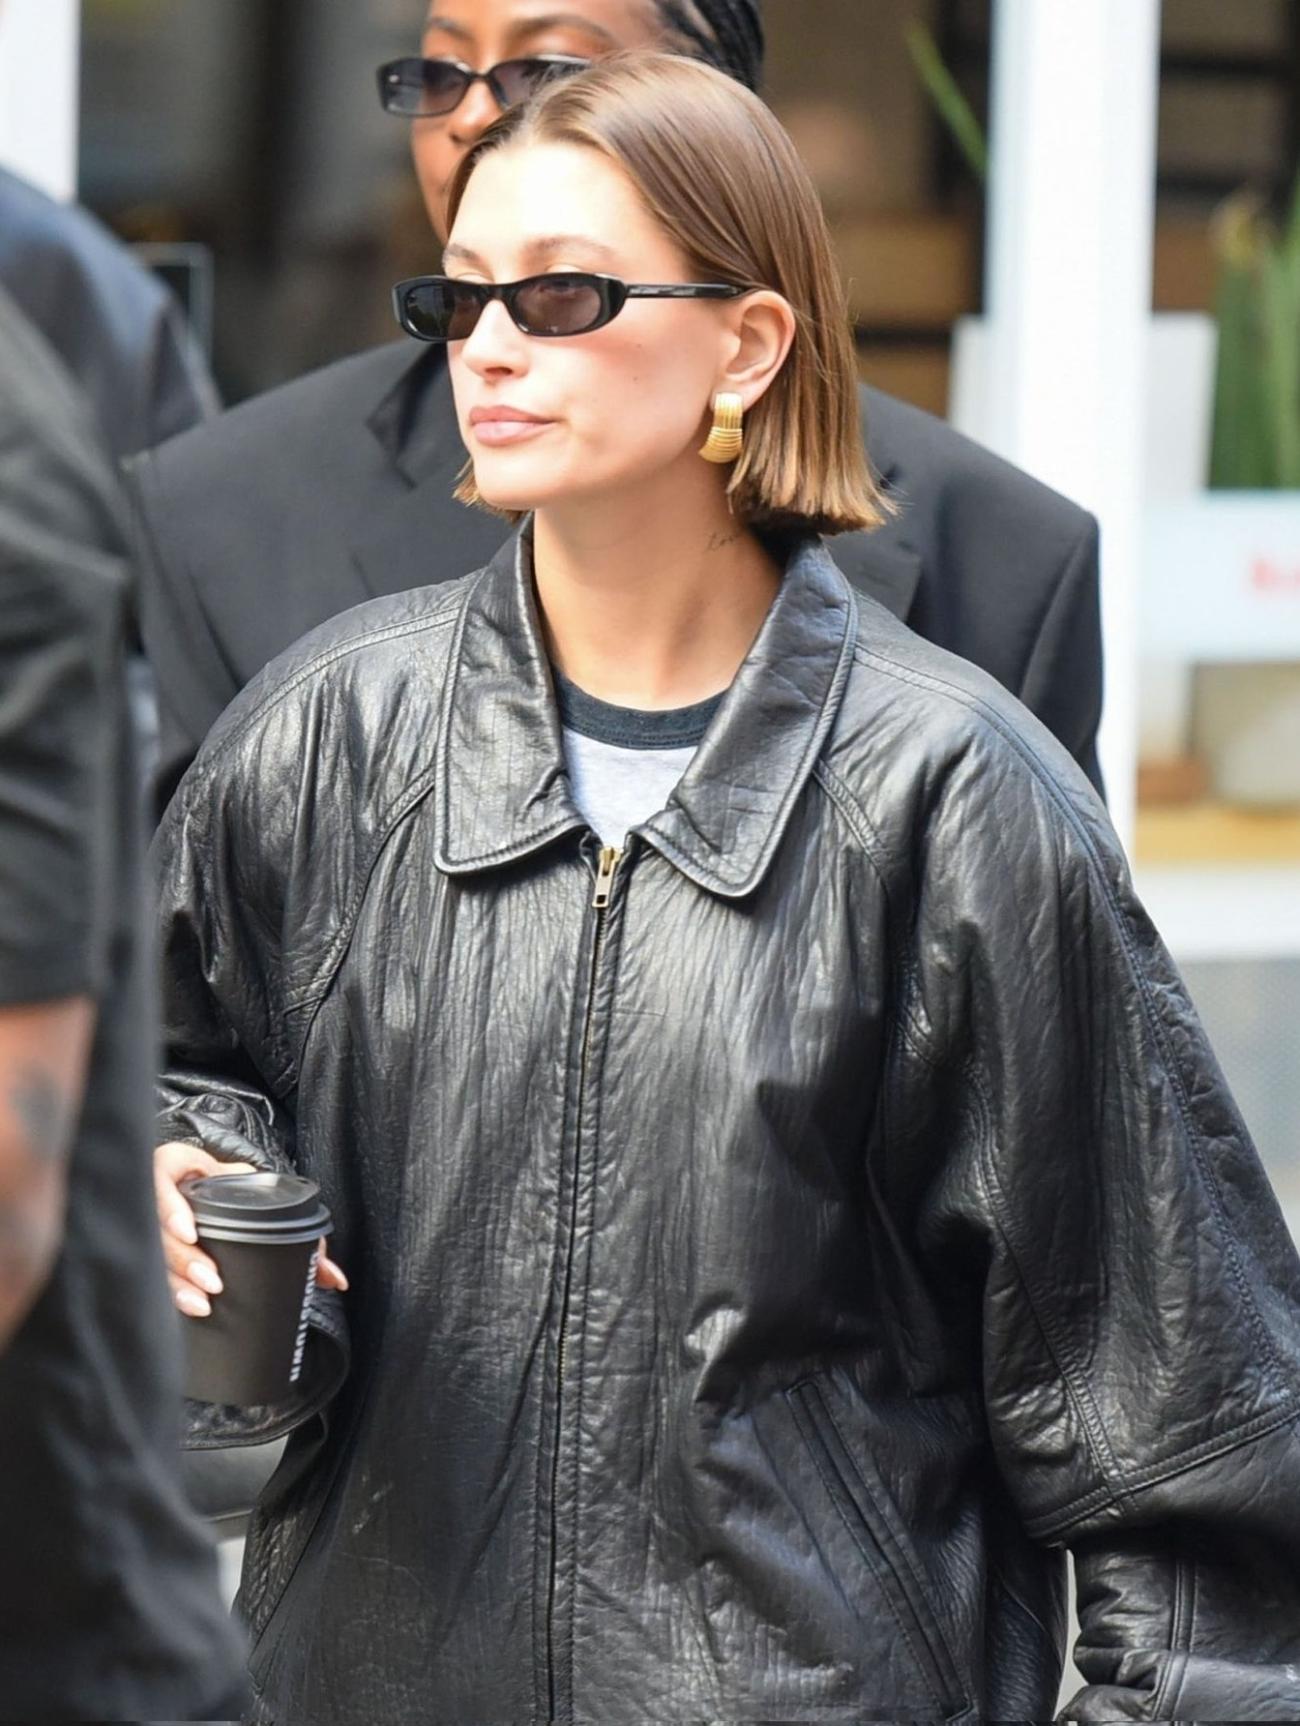 Hailey Bieber in London wearing Previously Known Vintage Black Oversized Zip-Up Jacket, Saint Laurent Black SL 557 Shade Sunglasses